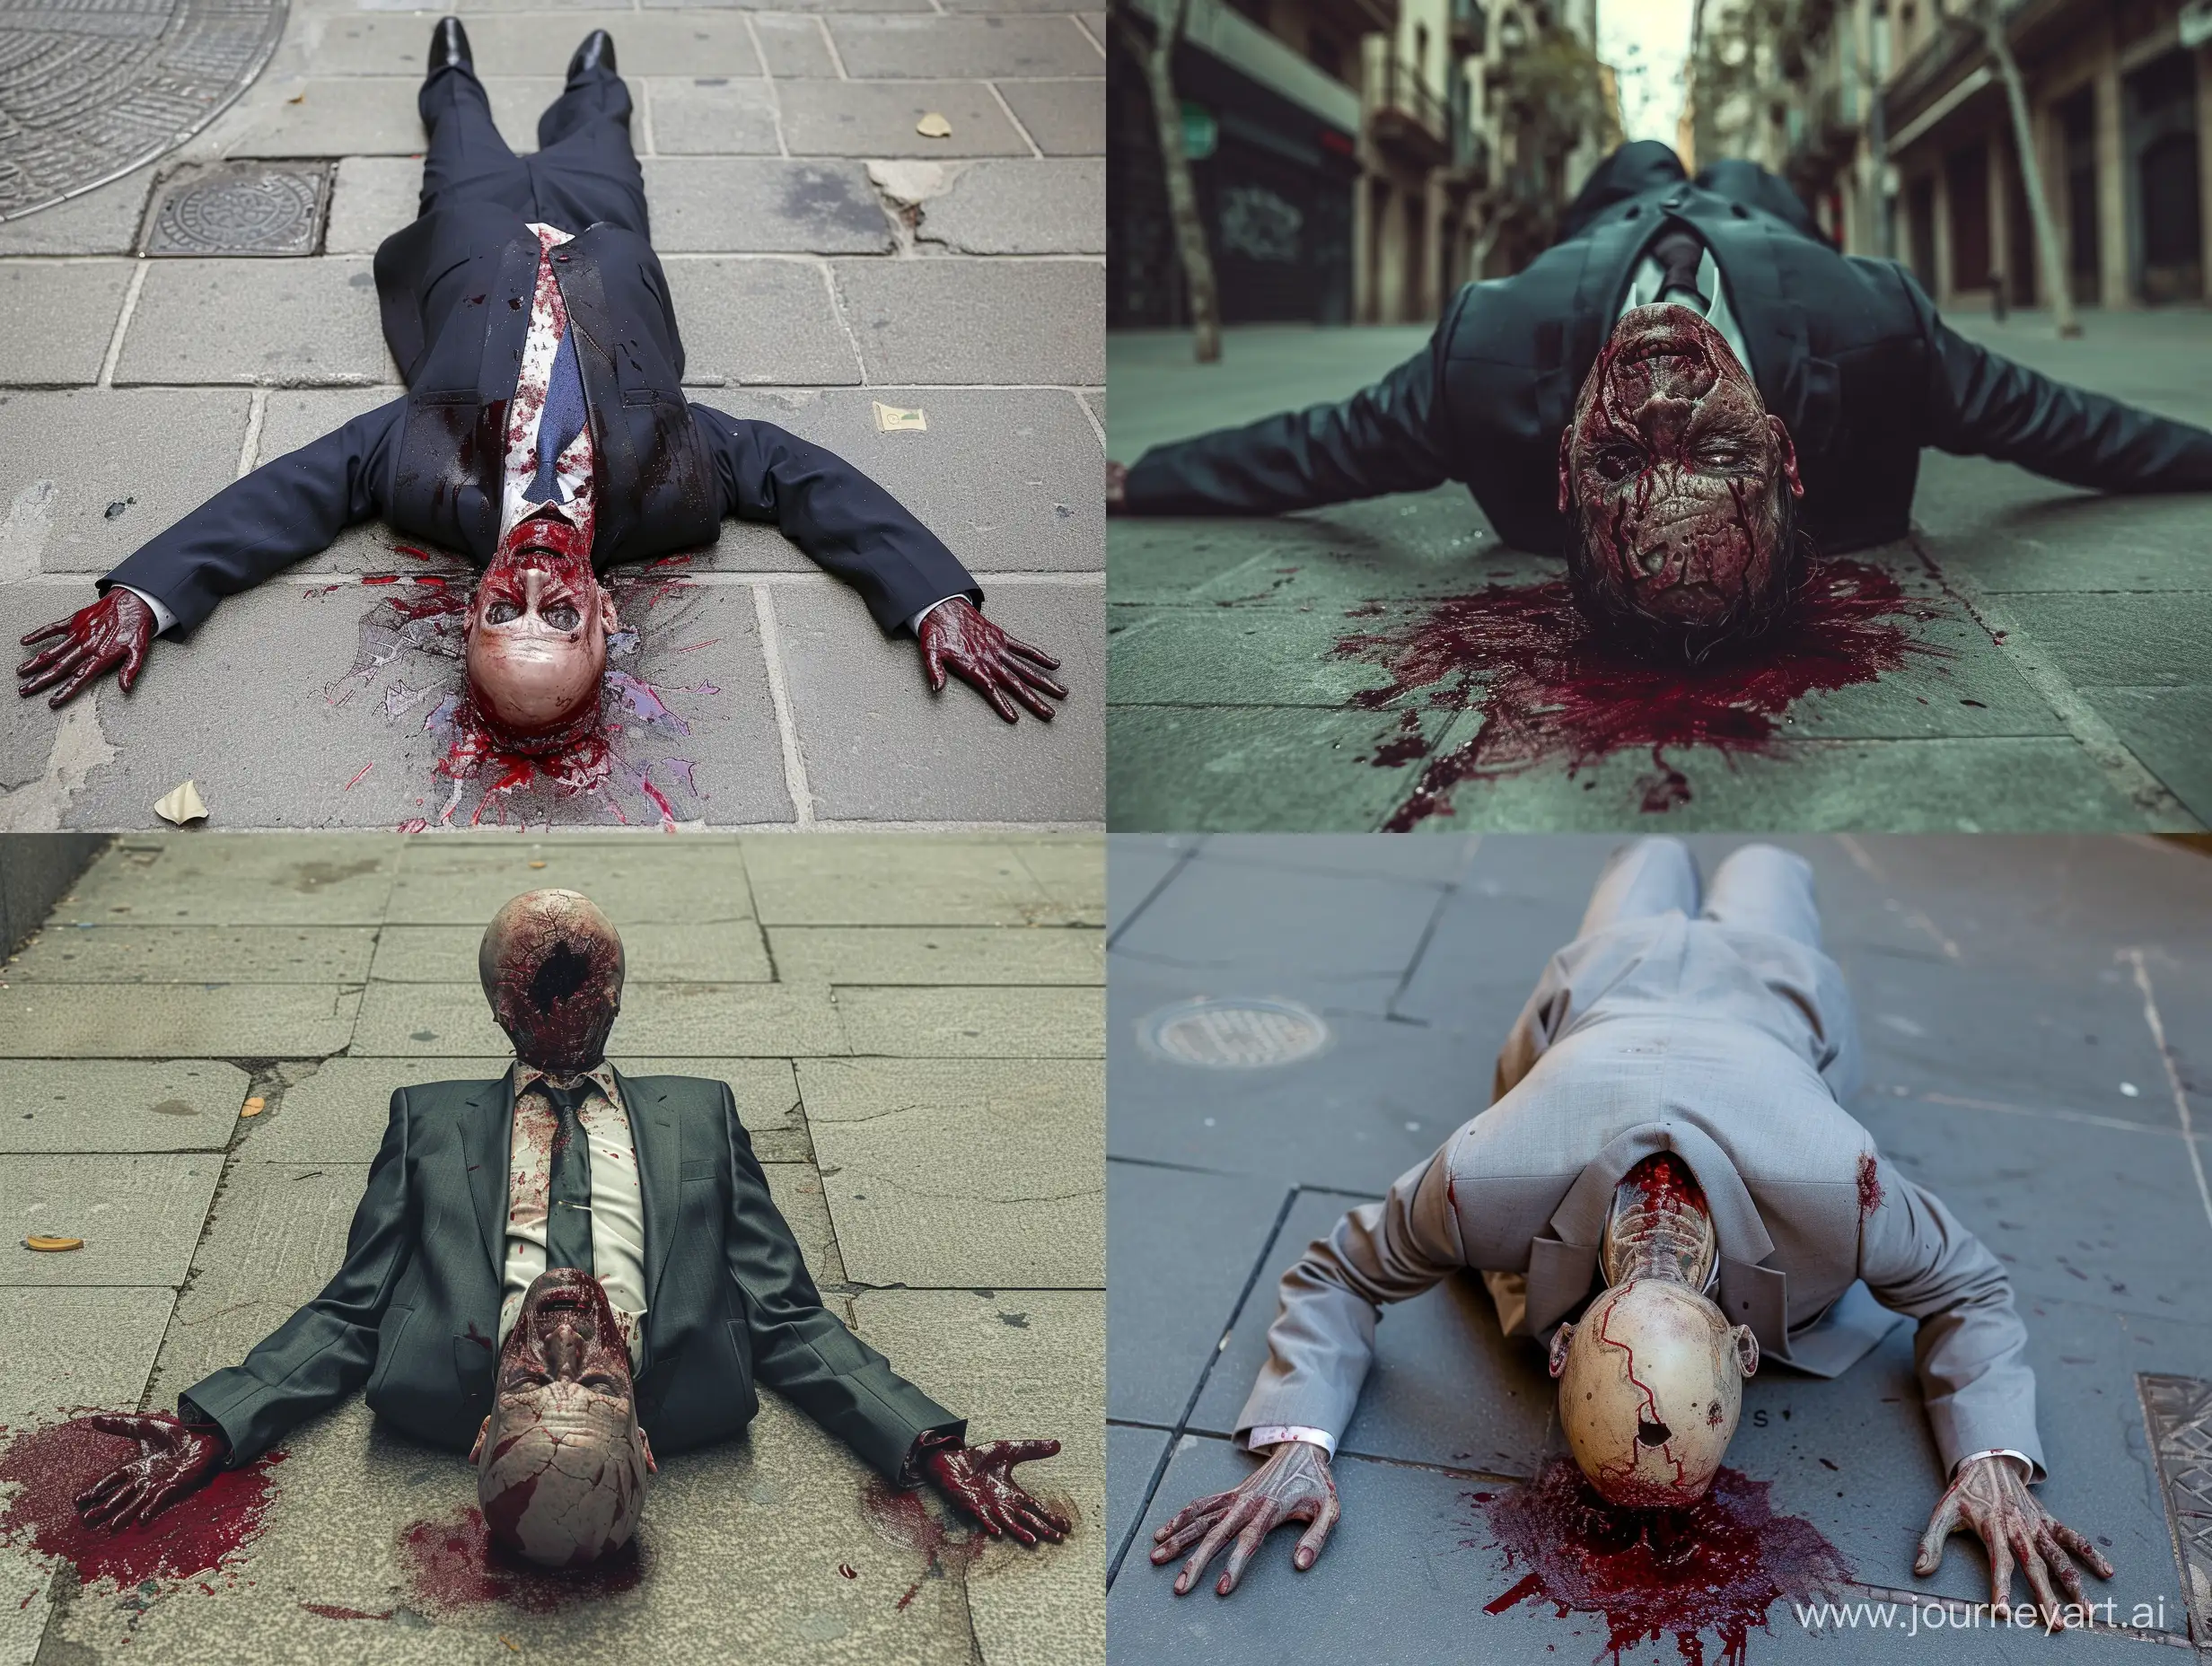 Realistic-Crime-Scene-Bloodied-Corpse-in-Suit-on-Barcelona-Pavement